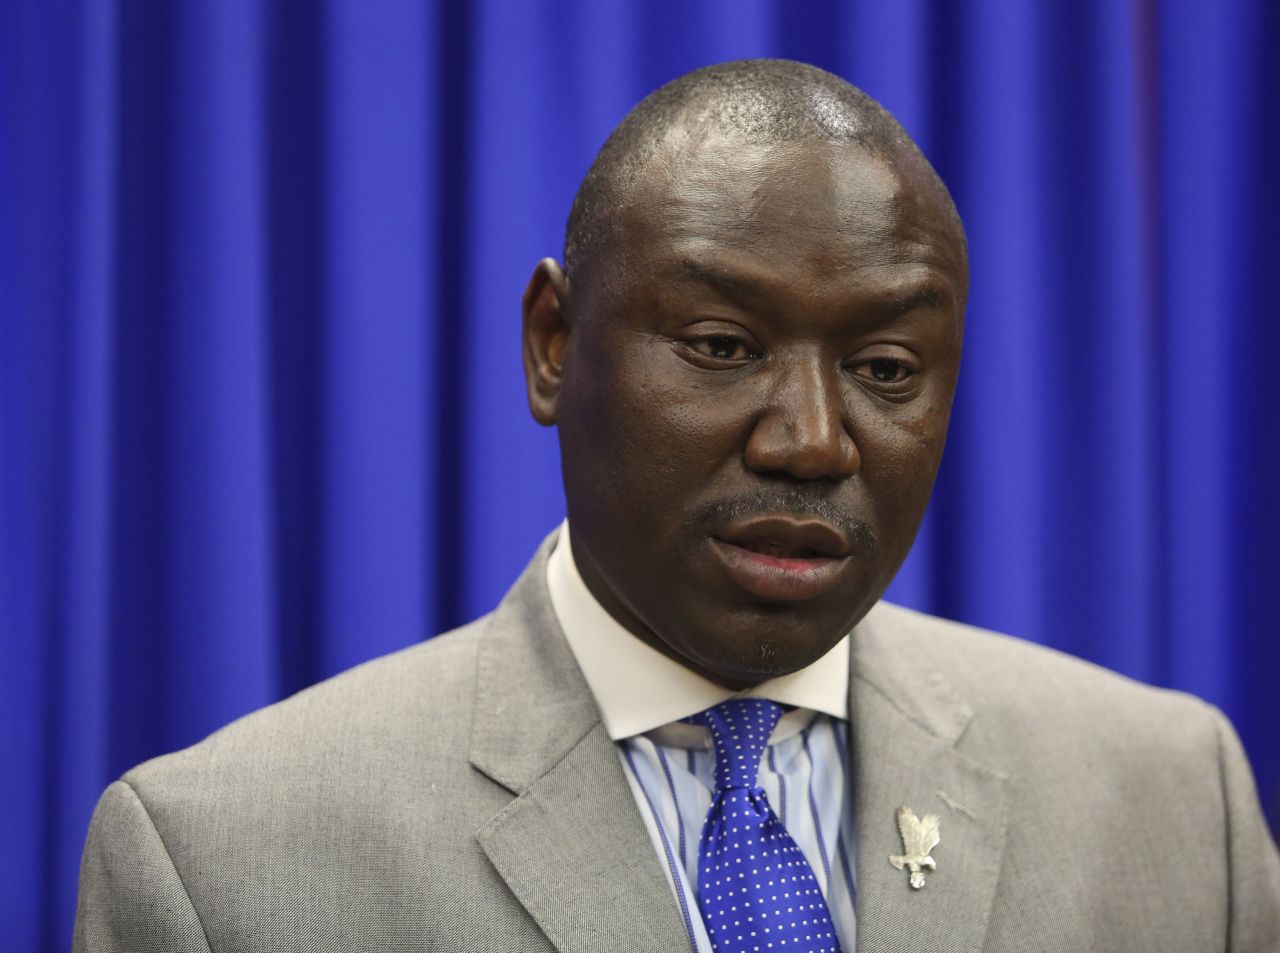 Attorney Benjamin Crump represented Trayvon Martin's parents. He has subsequently represented the family of Michael Brown, who was killed by a police officer in August, and the family of Tamir Rice, a 12-year-old boy who was shot by police in November.